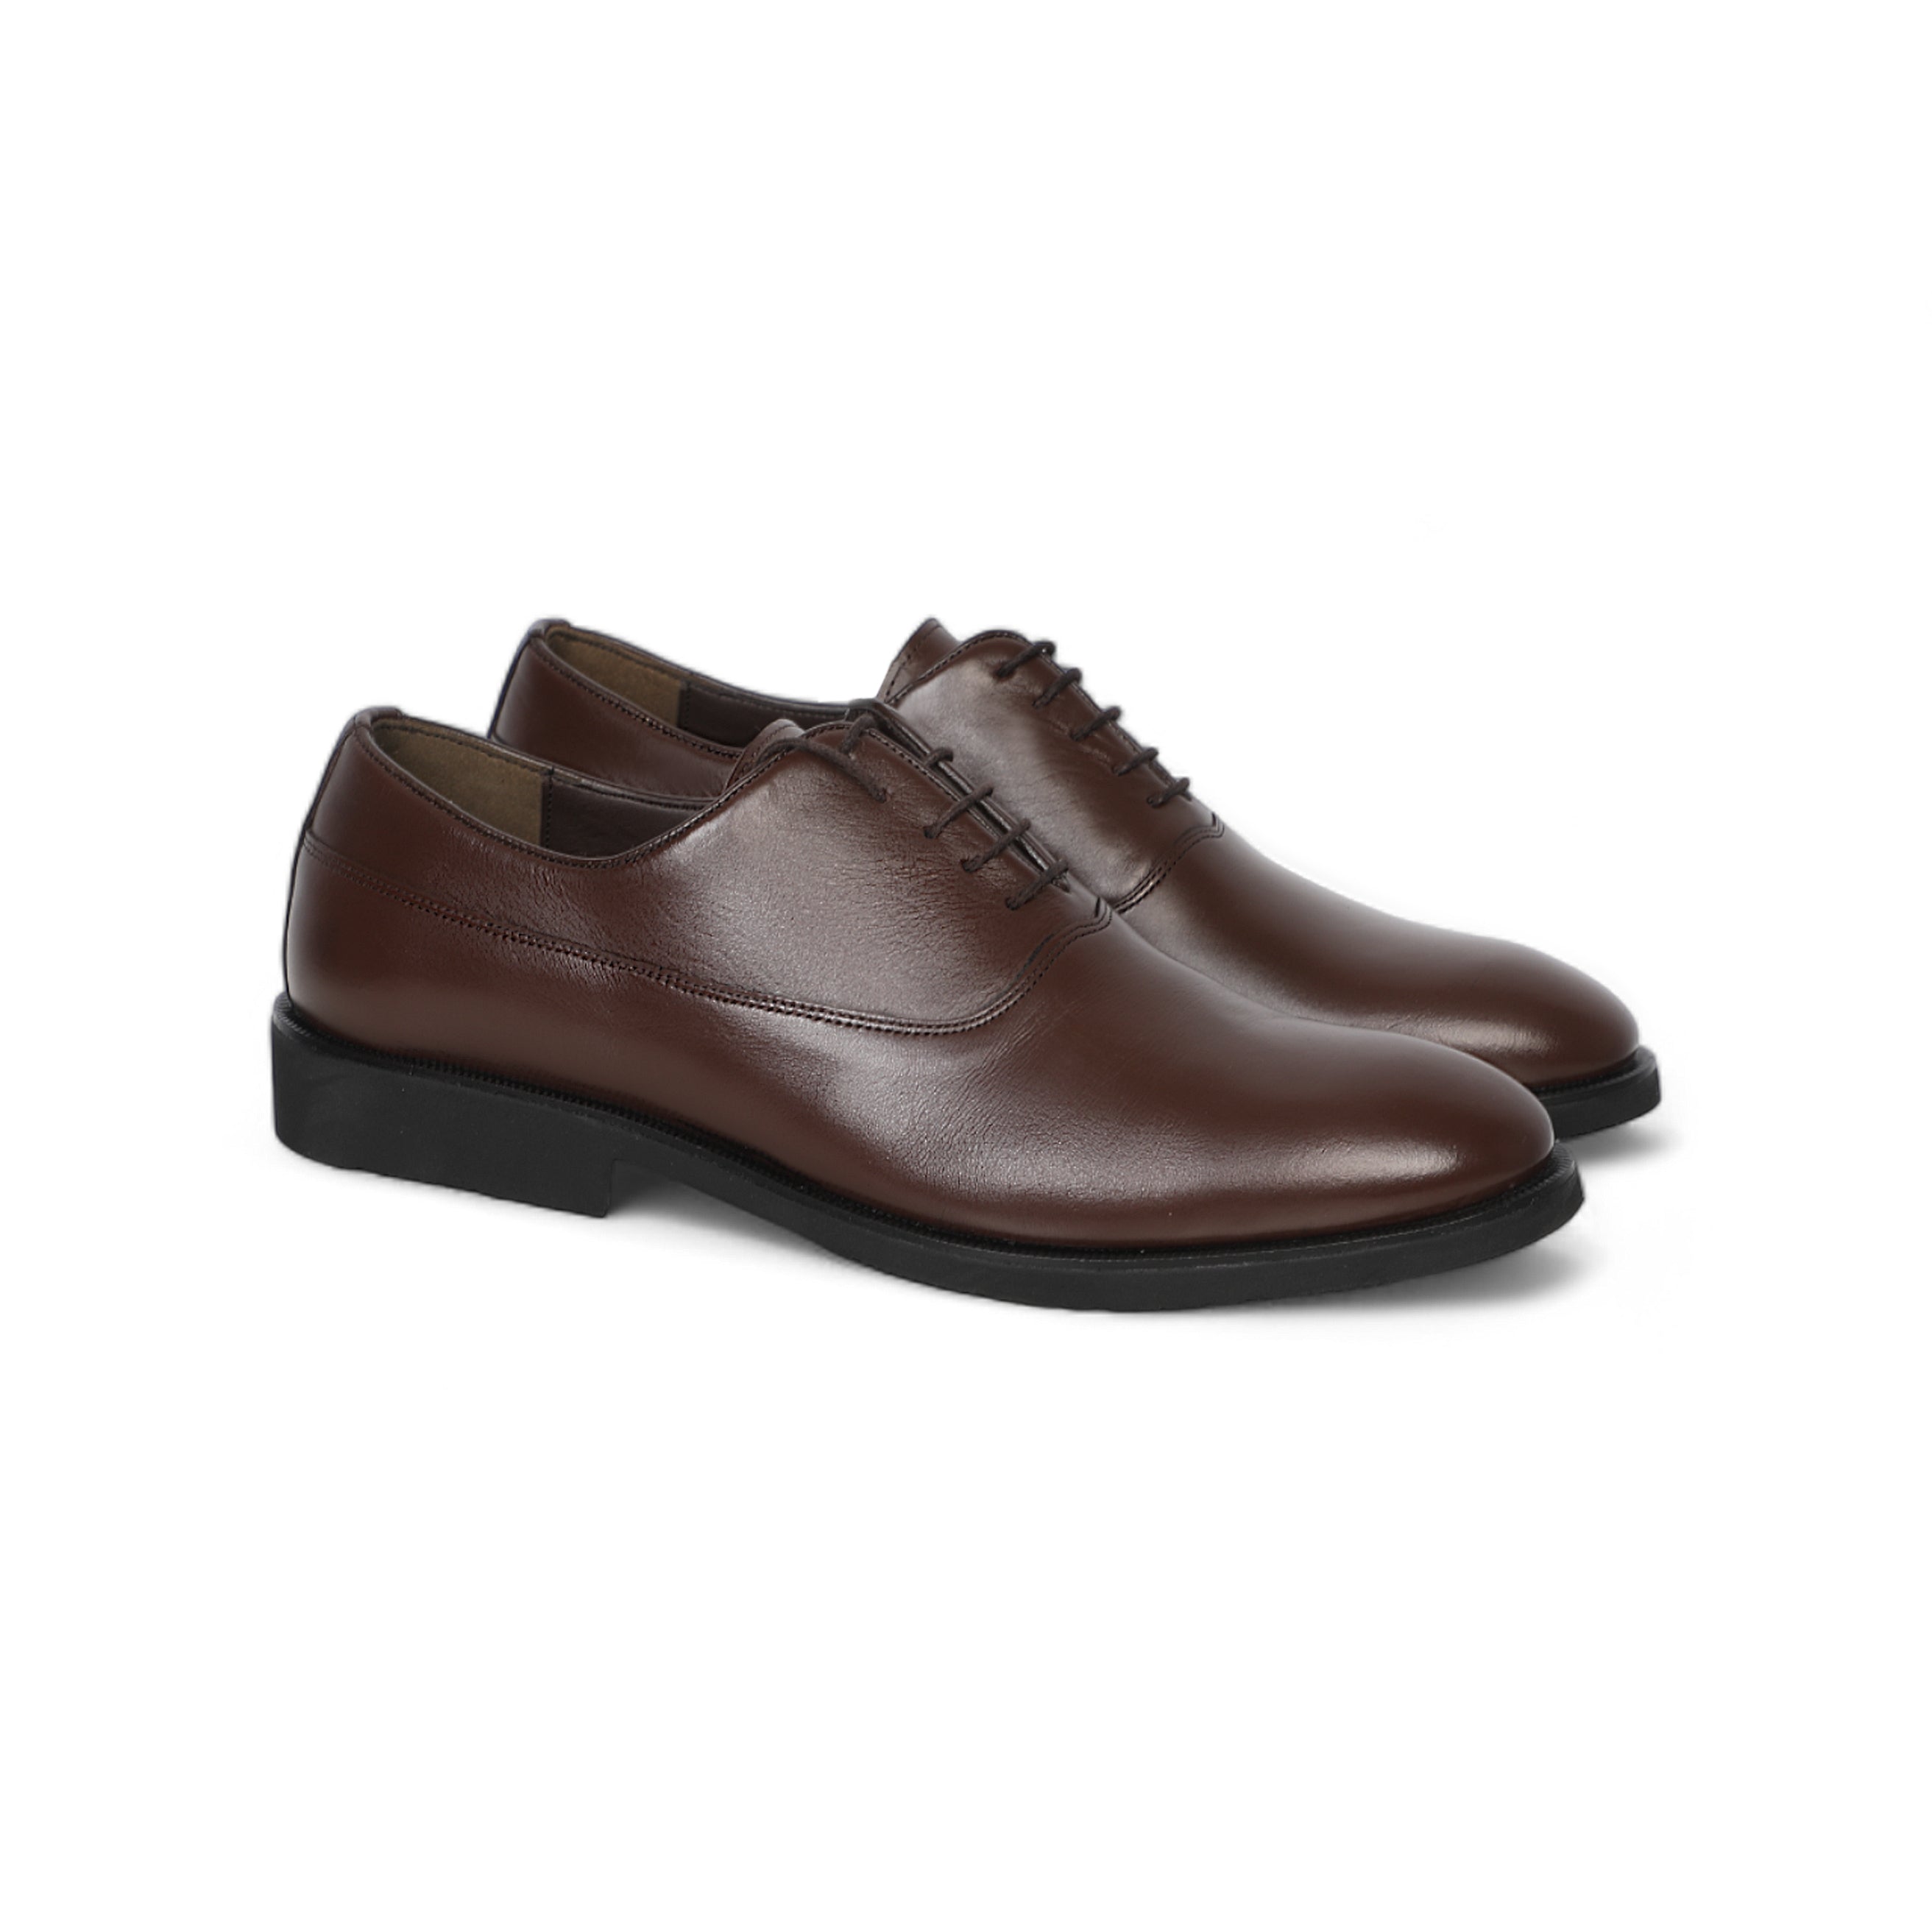 Classic Men Brown Shoes Solid With Lace-Up